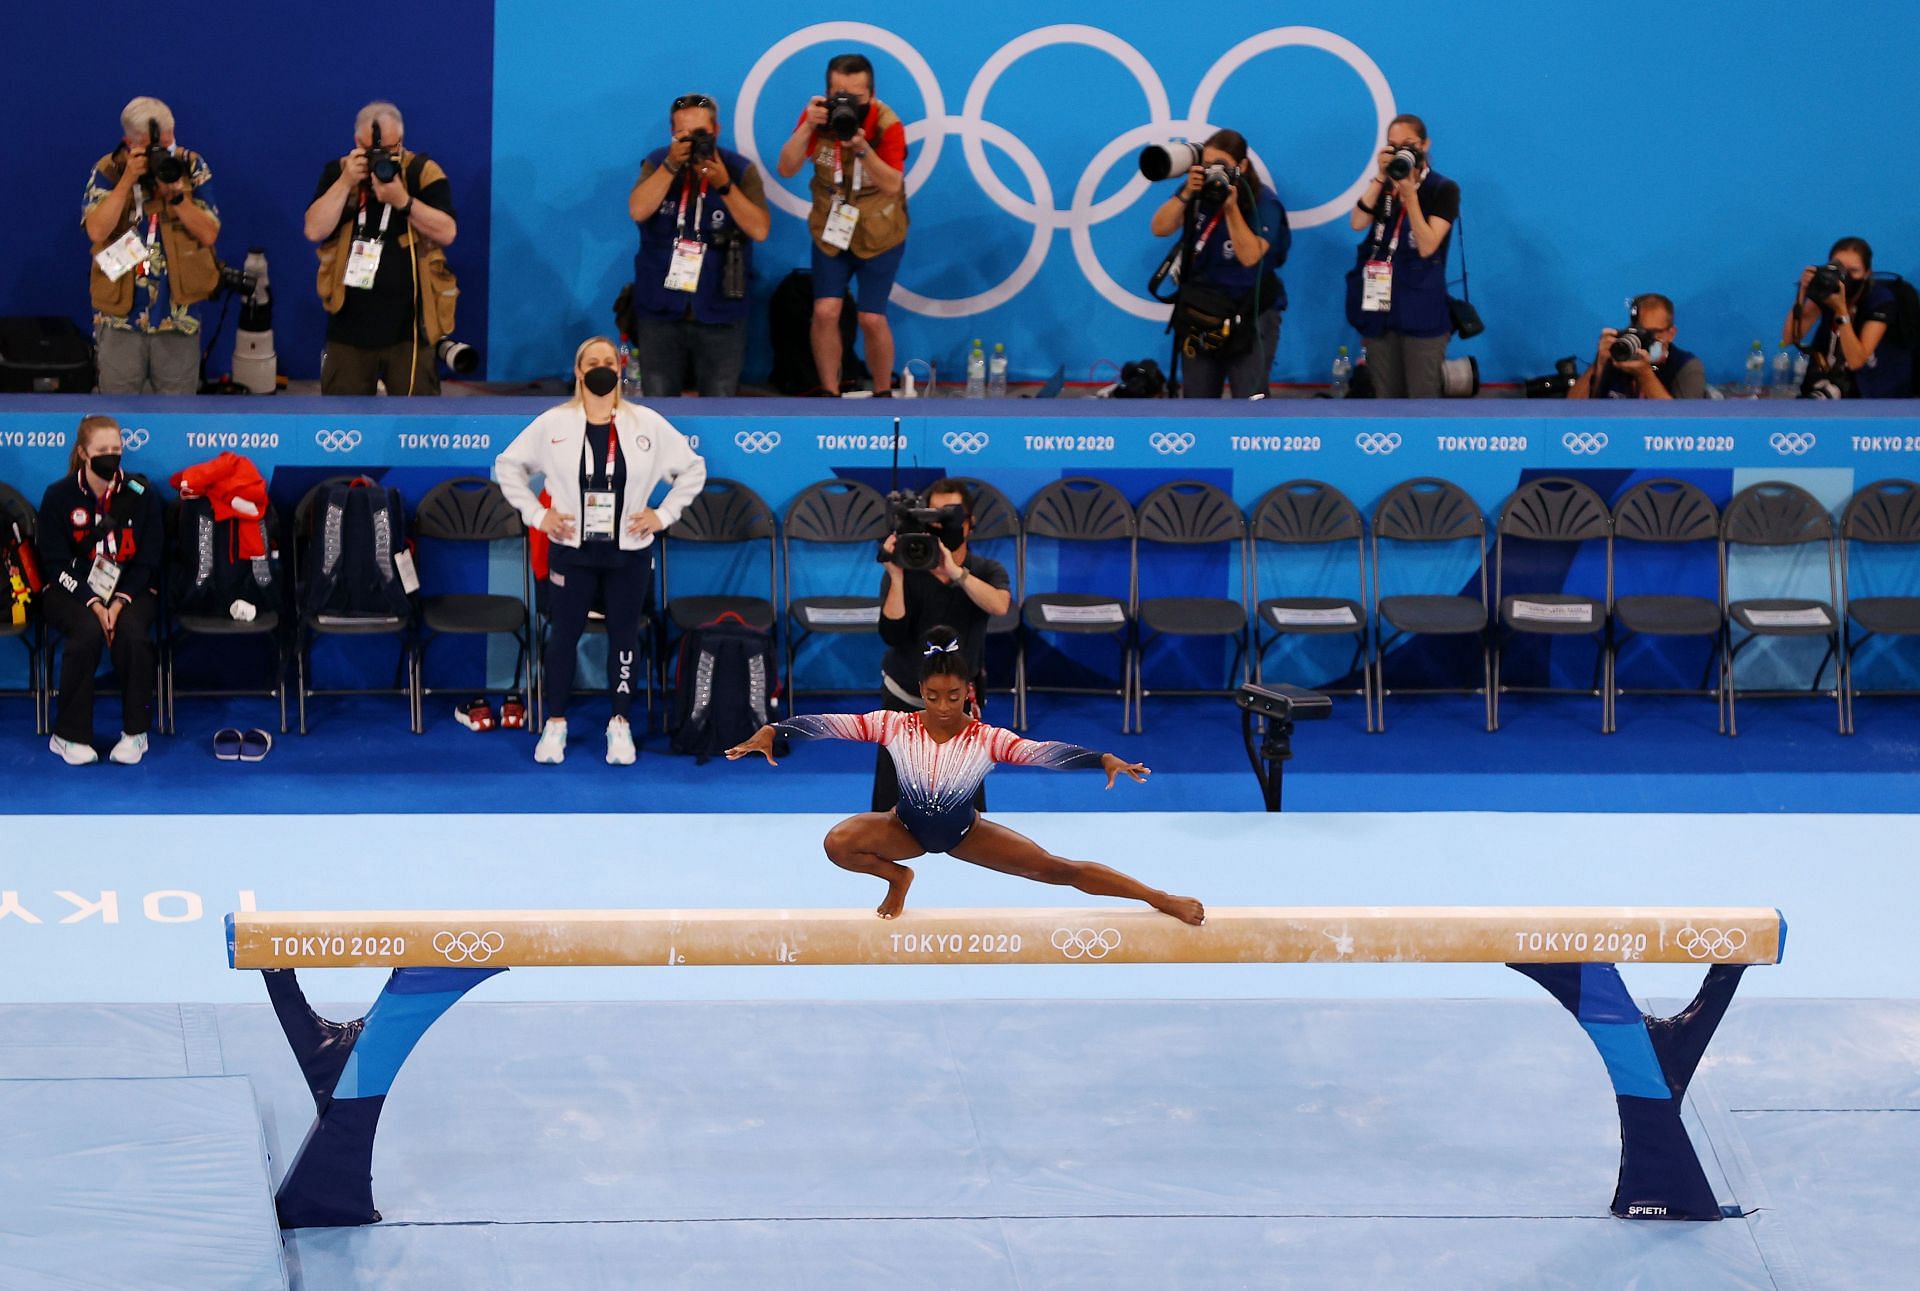 Biles performing on the balance beam at the 2020 Tokyo Olympics